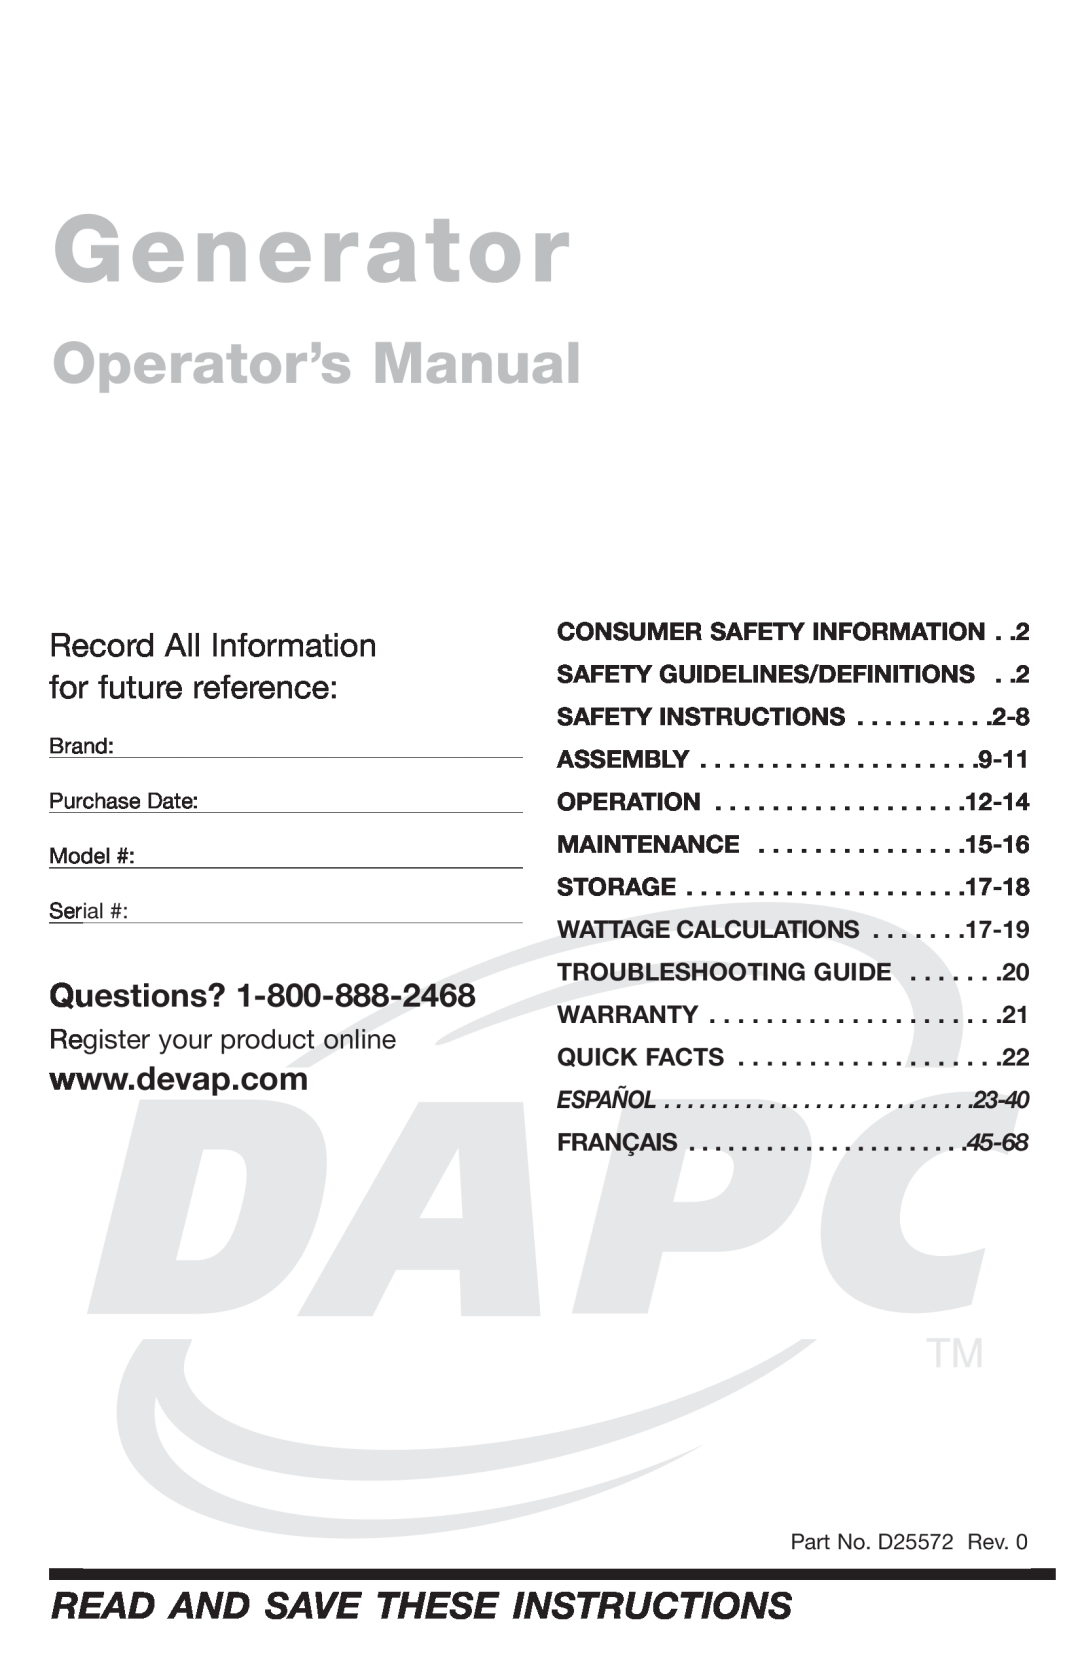 DeVillbiss Air Power Company D25572 warranty Generator, Operator’s Manual, Read And Save These Instructions, Questions? 